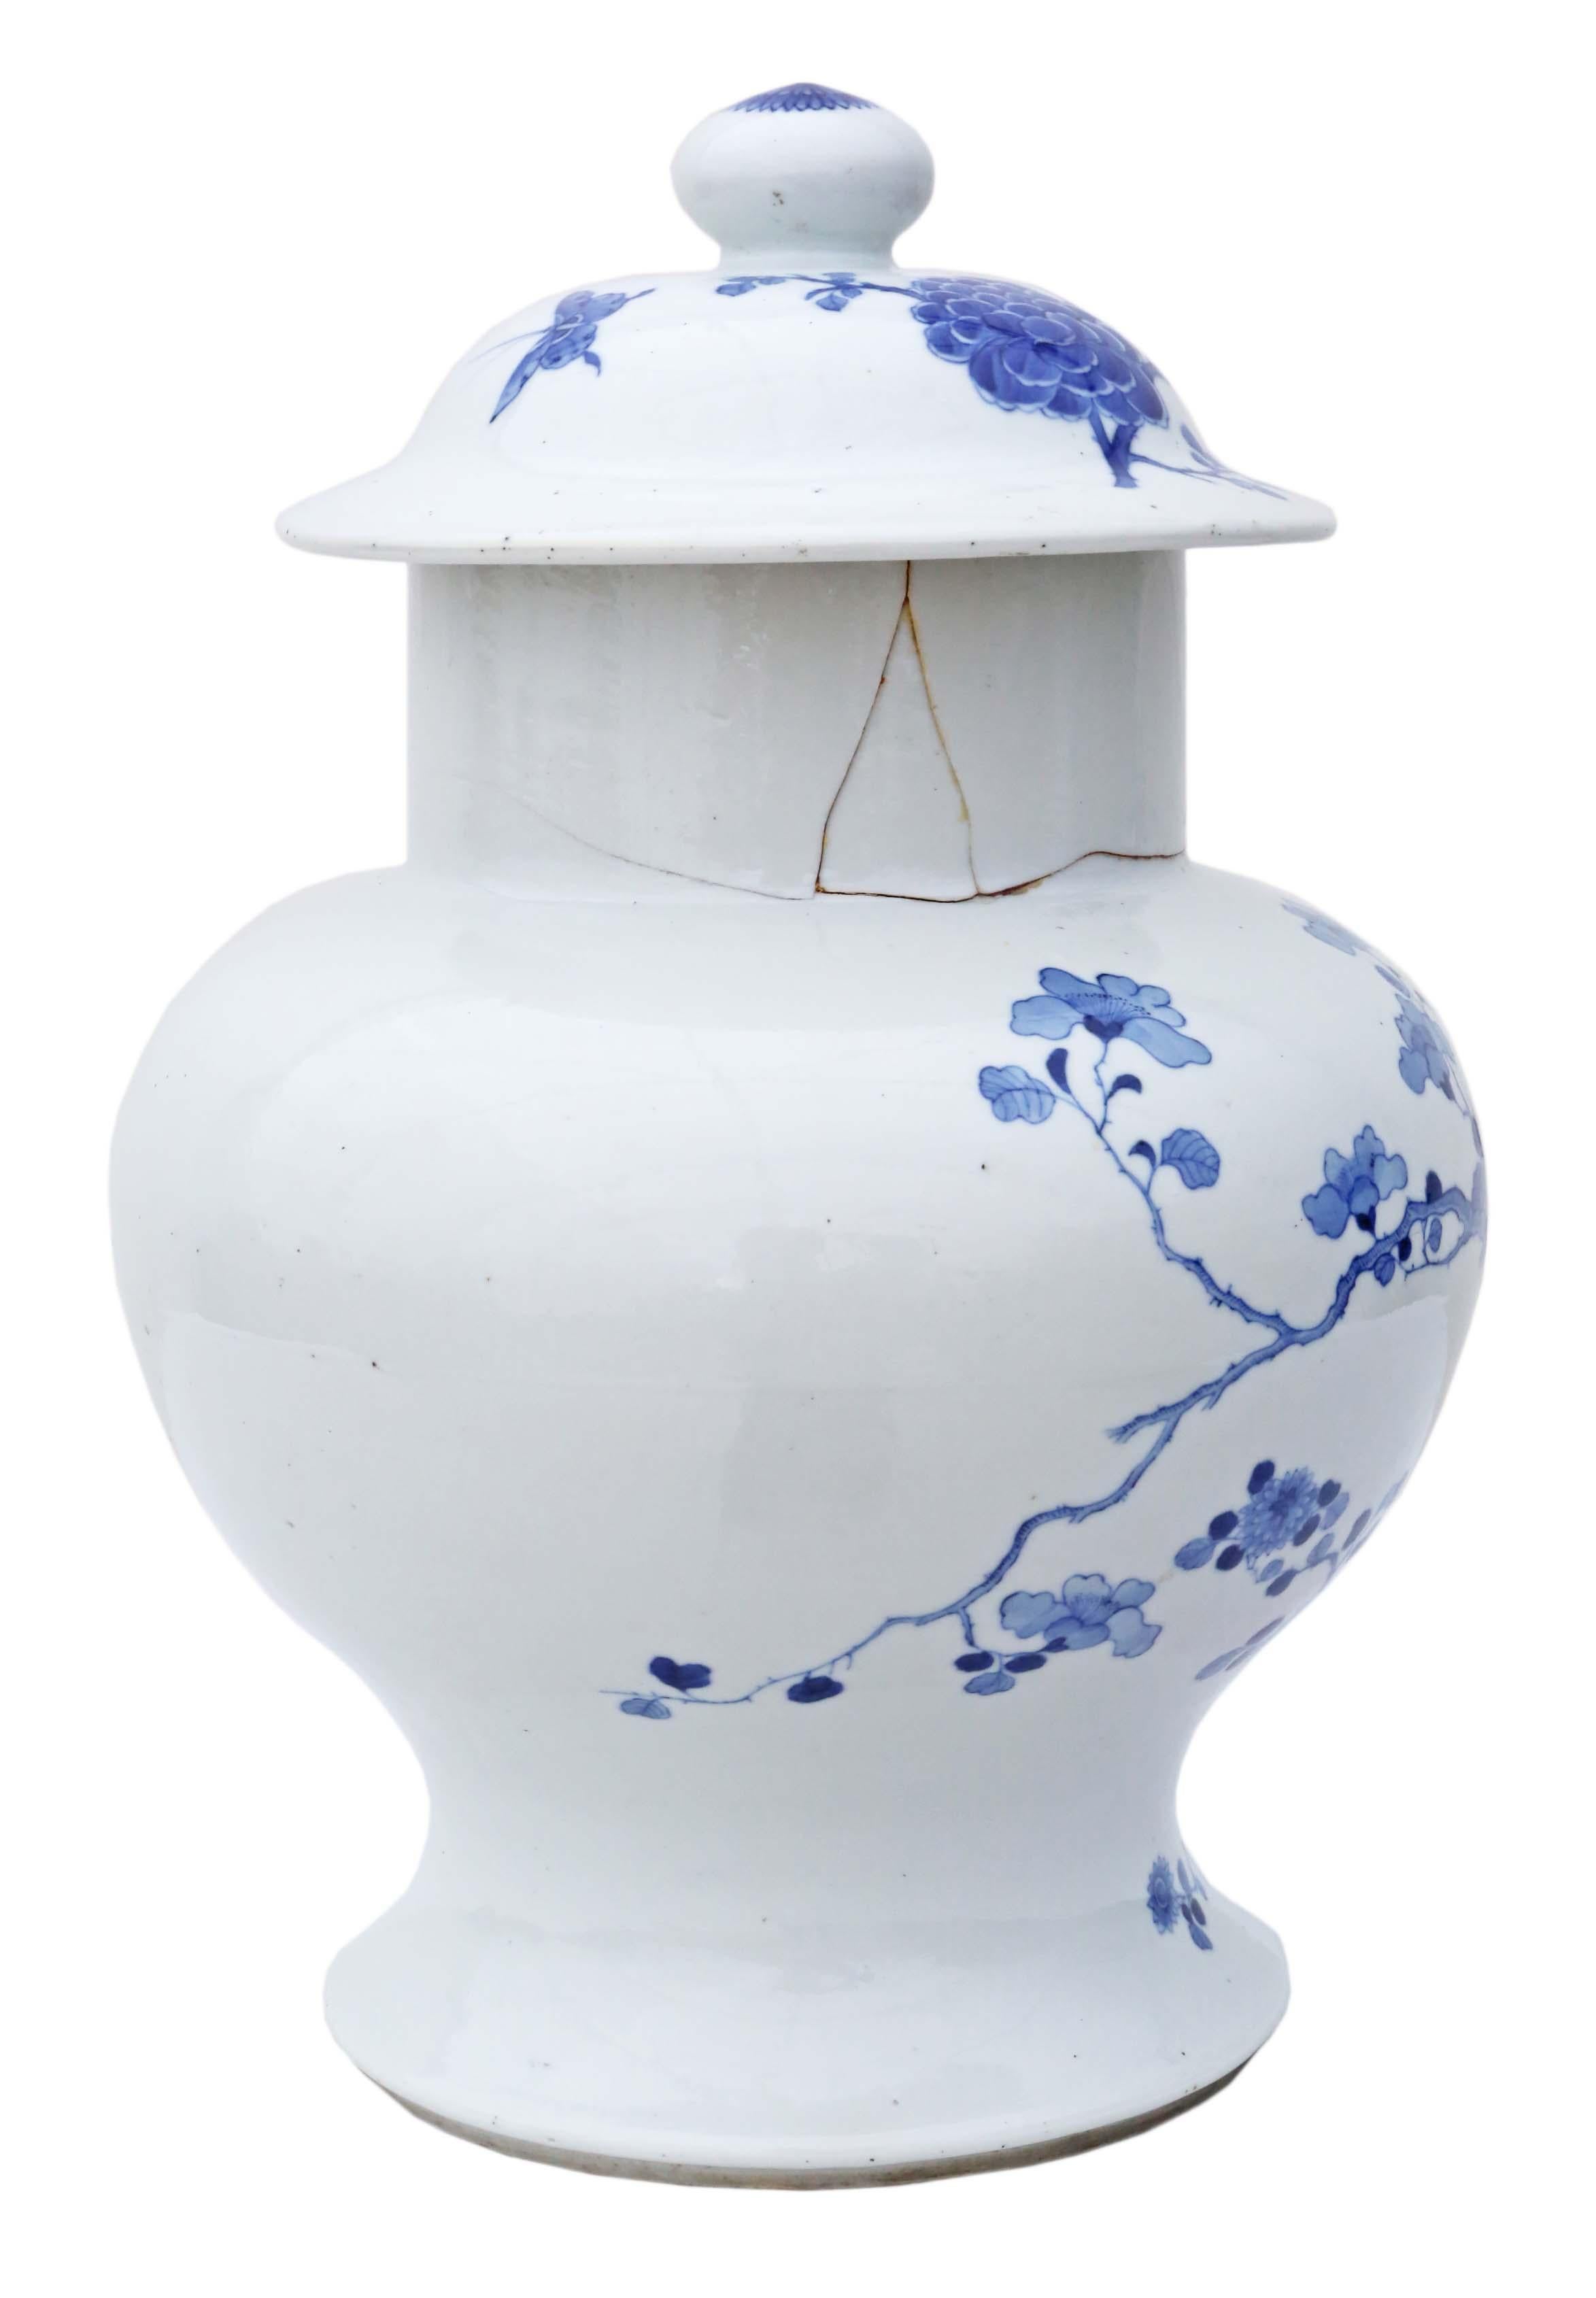 Antique large blue and white Chinese Oriental ceramic ginger jar with lid. The exact age is uncertain, but it is believed to date from the late 18th or early 19th century. It features a 6-character mark on the base.

This piece is highly decorative